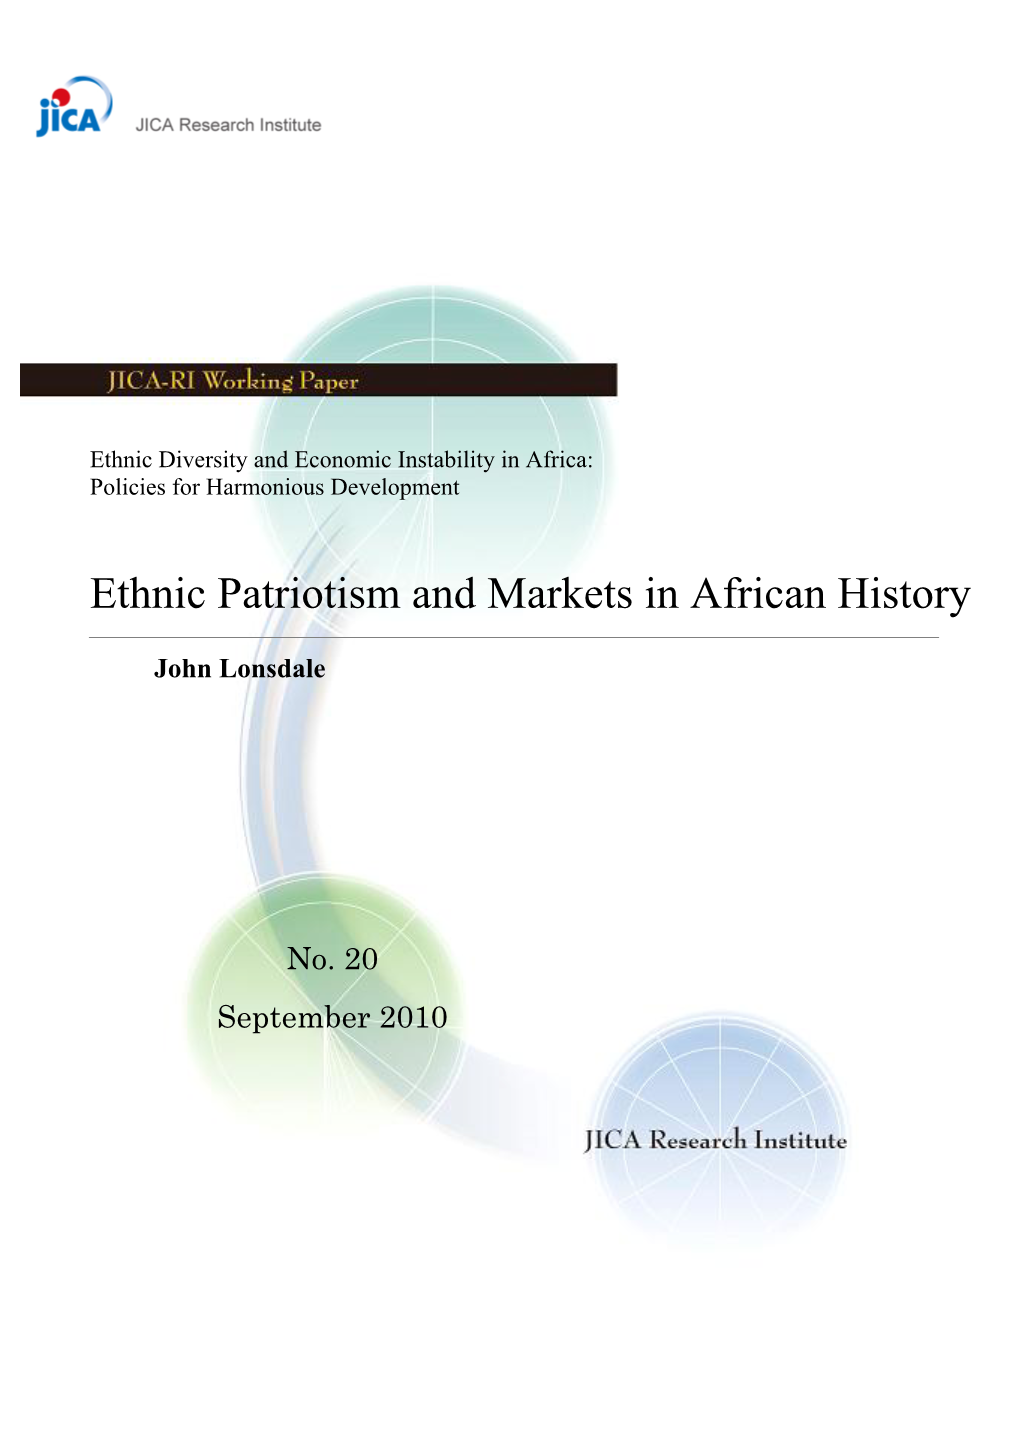 Ethnic Patriotism and Markets in African History